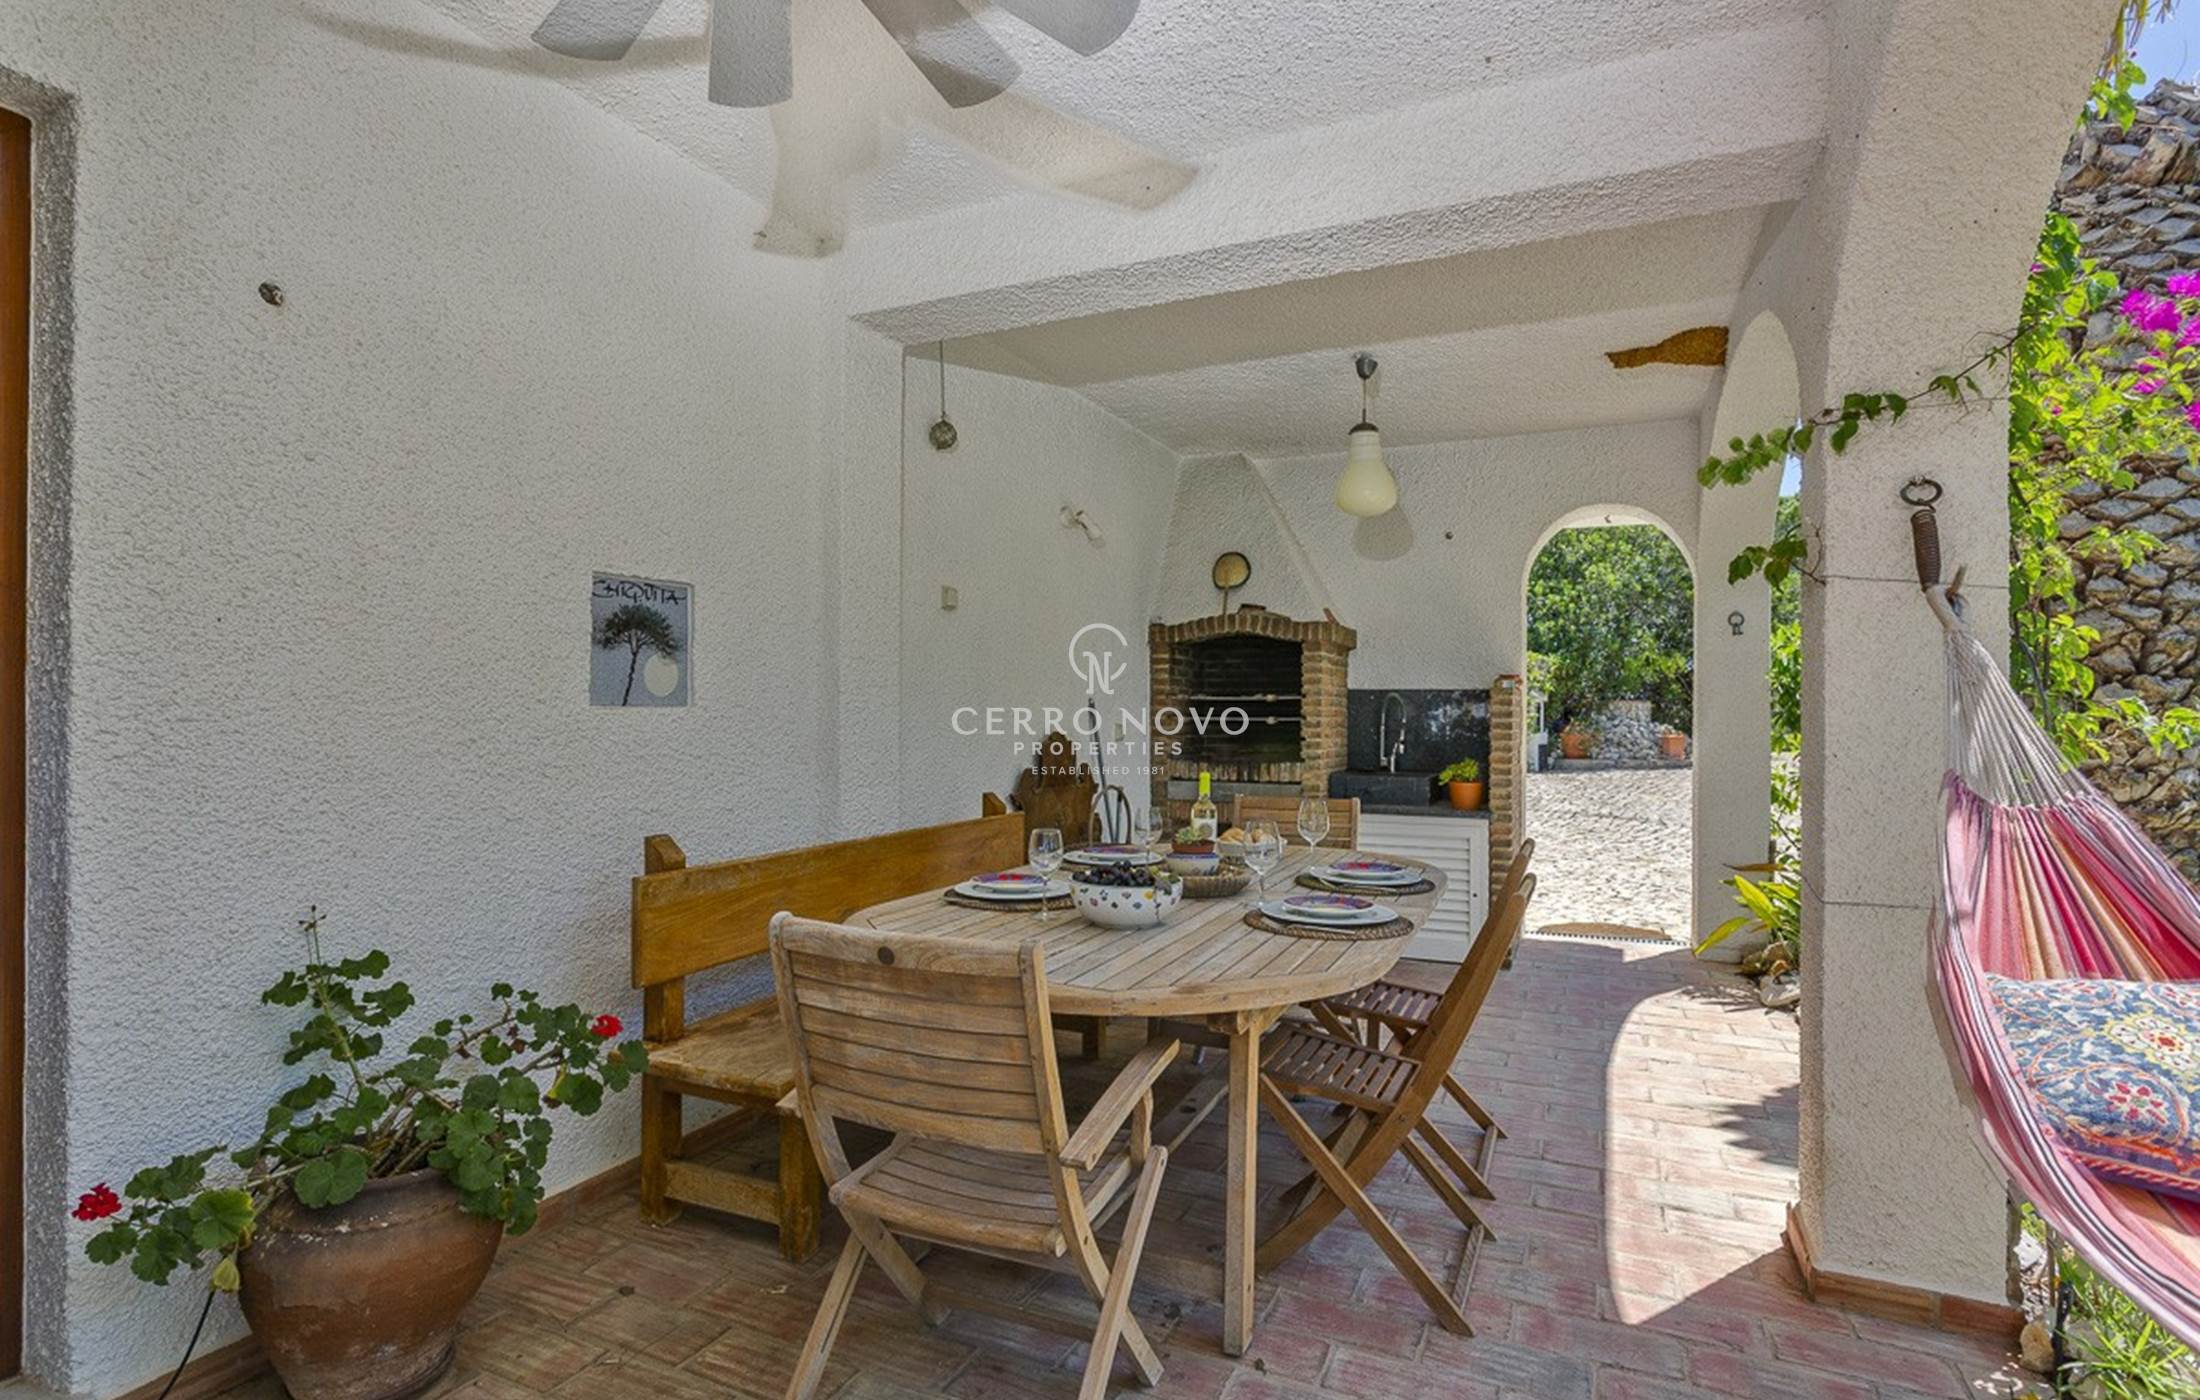 Character two bedroom villa close to beaches and bird reserve